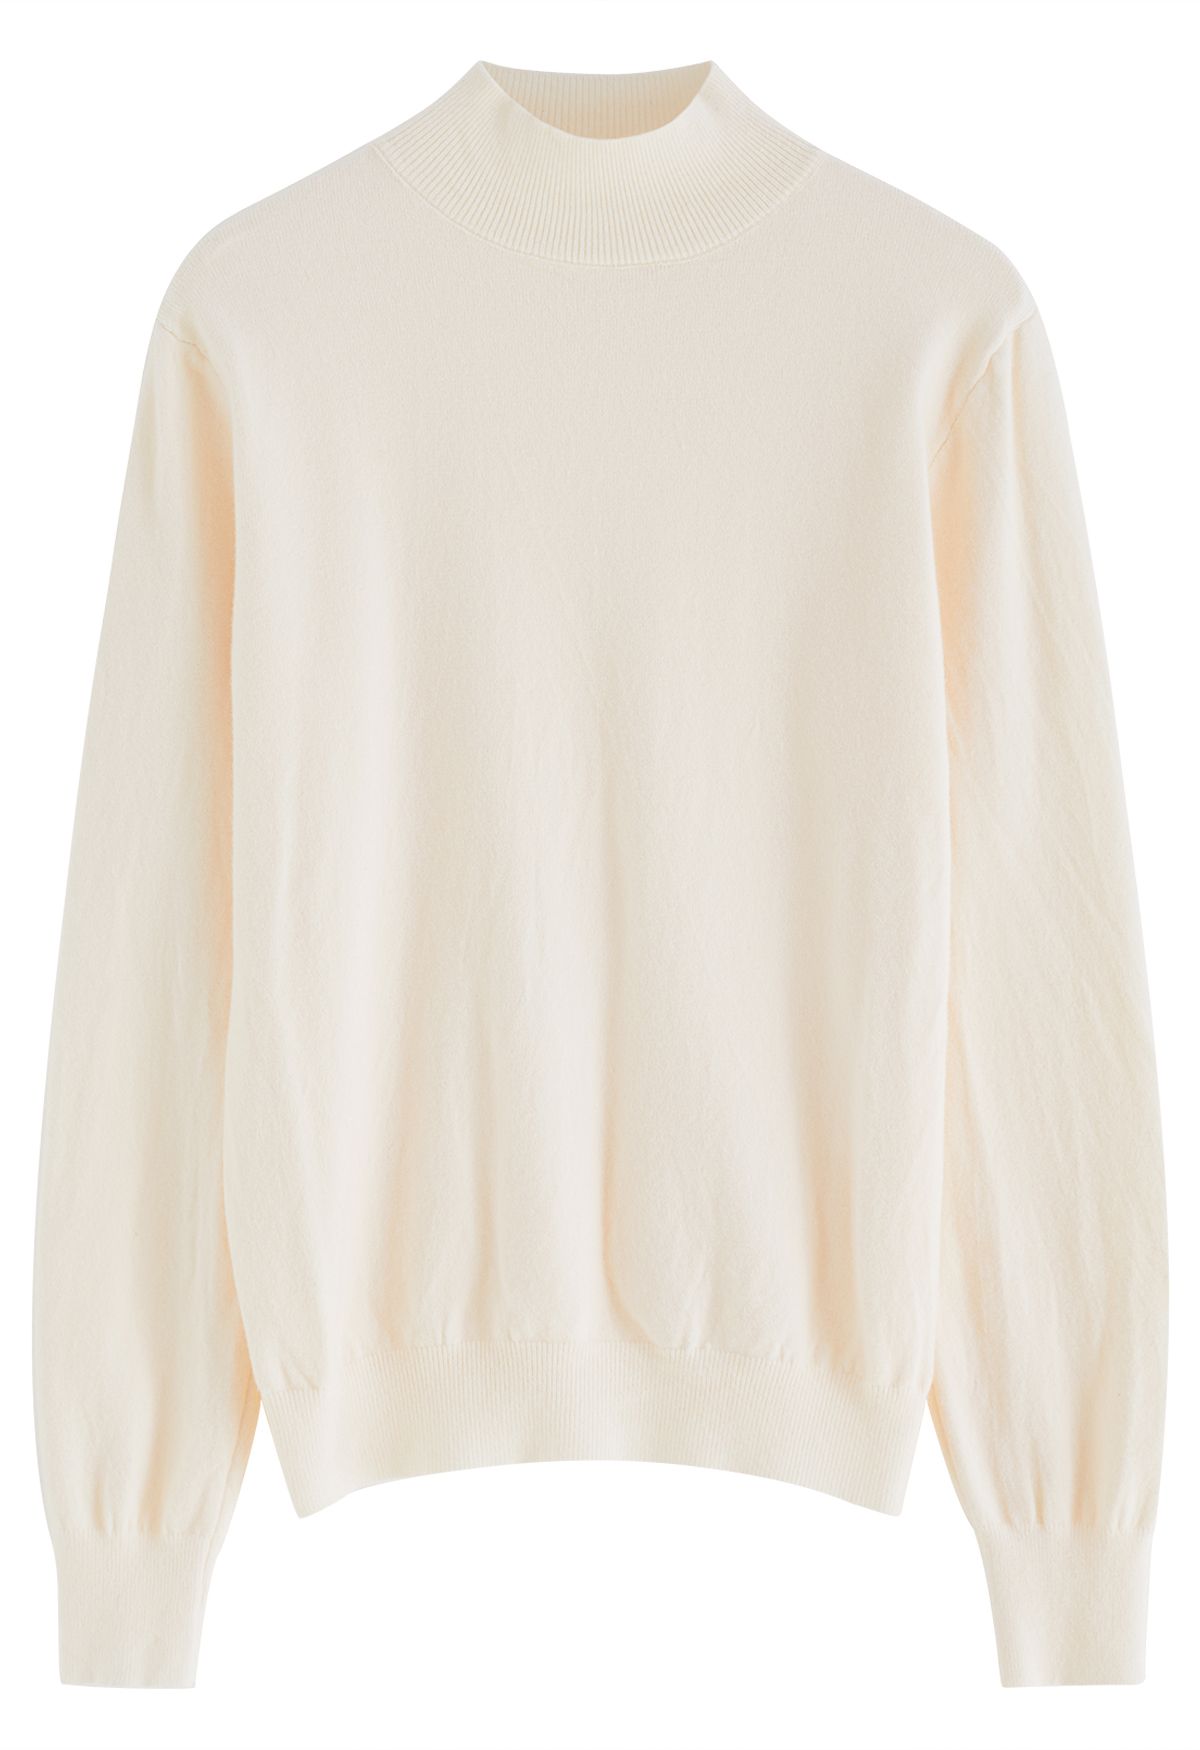 Simple Mock Neck Knit Top in Cream